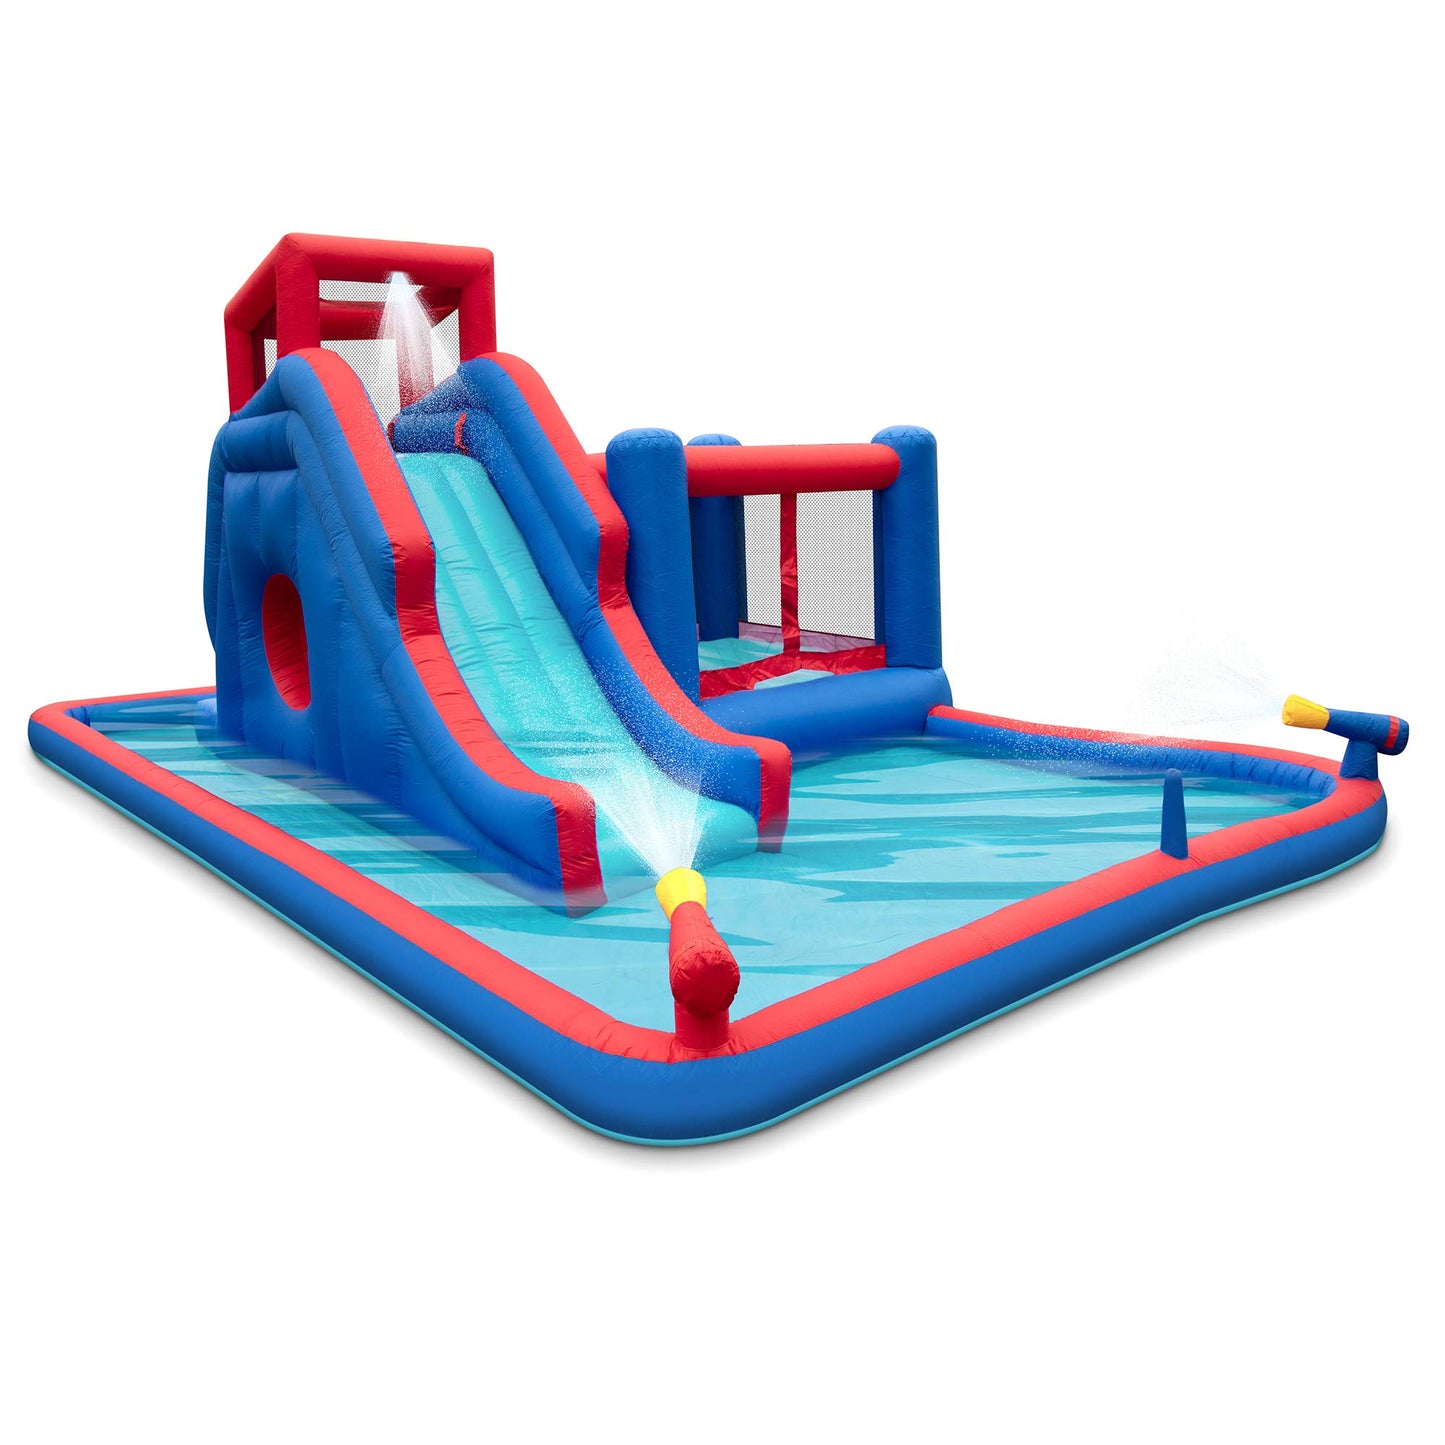 Sunny & Fun 2-in-1 Bounce & Blast Inflatable Water Slide Park – Heavy-Duty for Outdoor Fun - Climbing Wall, Slide, Bouncer & Splash Pool – Easy to Set Up, Included Air Pump & Carrying Case